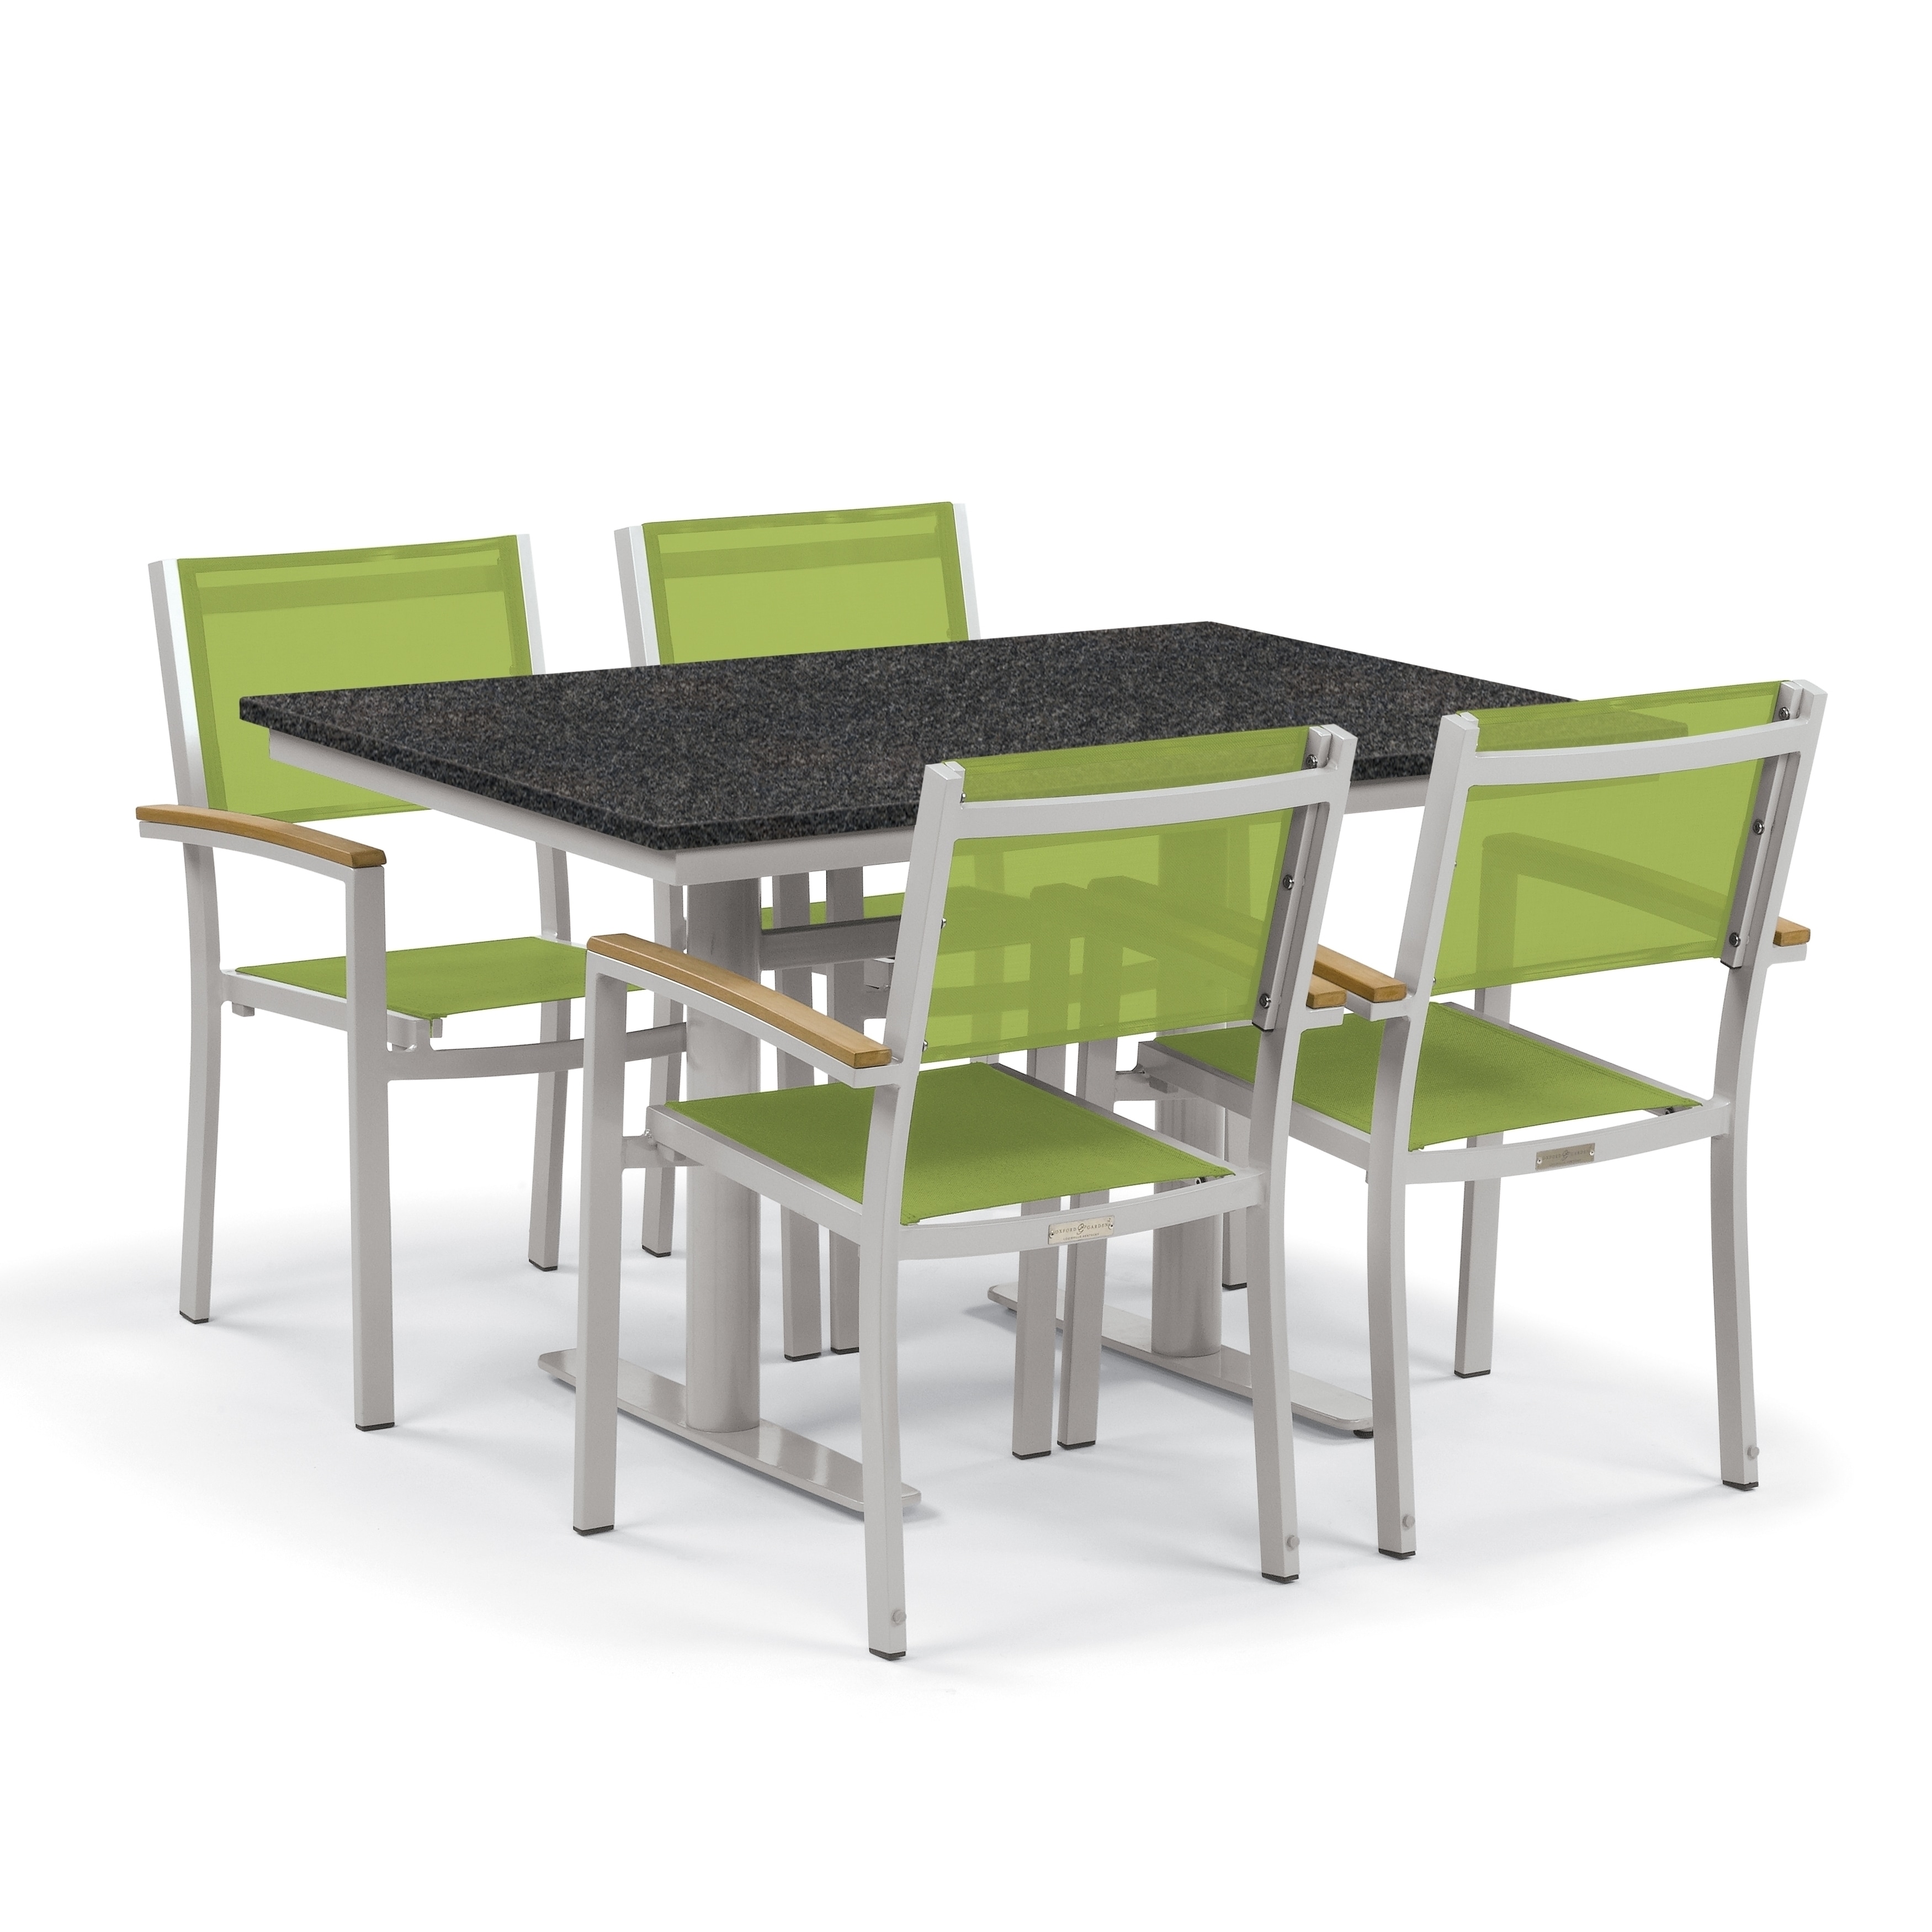 Oxford Garden Travira 5-piece Bistro Set With 34-inch X 48-inch Lite-core Charcoal Table - Natural Tekwood  Go Green Sling